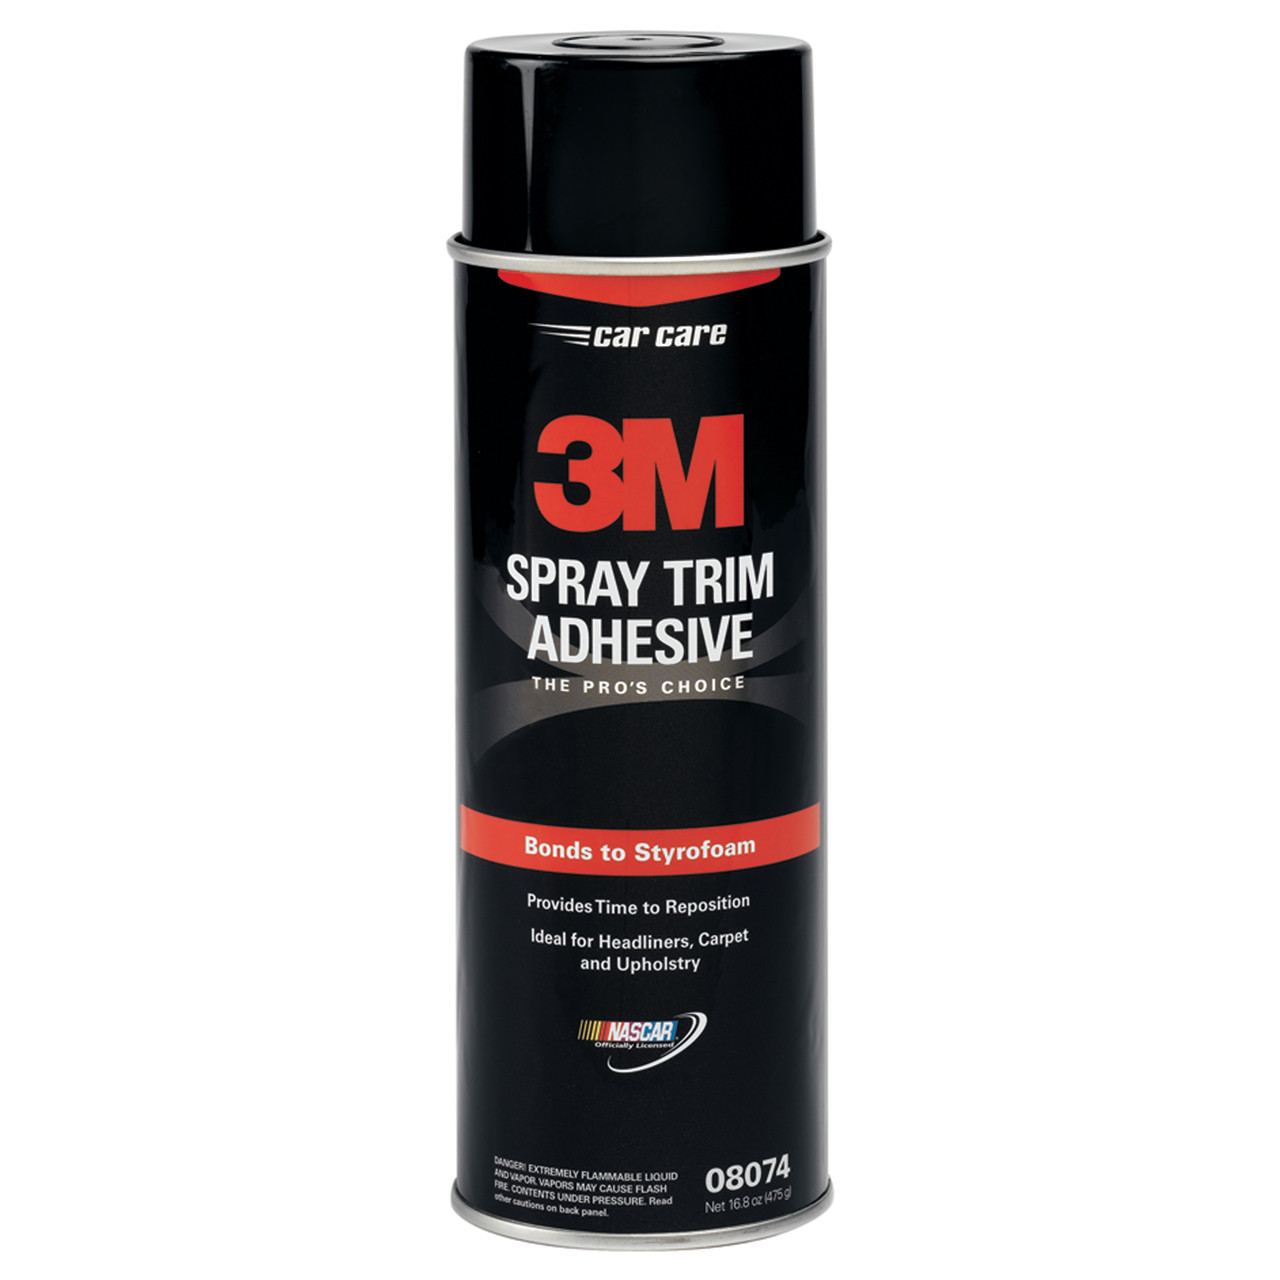 How To Remove 3M Super 77 Adhesive From Mold? - Composites Talk